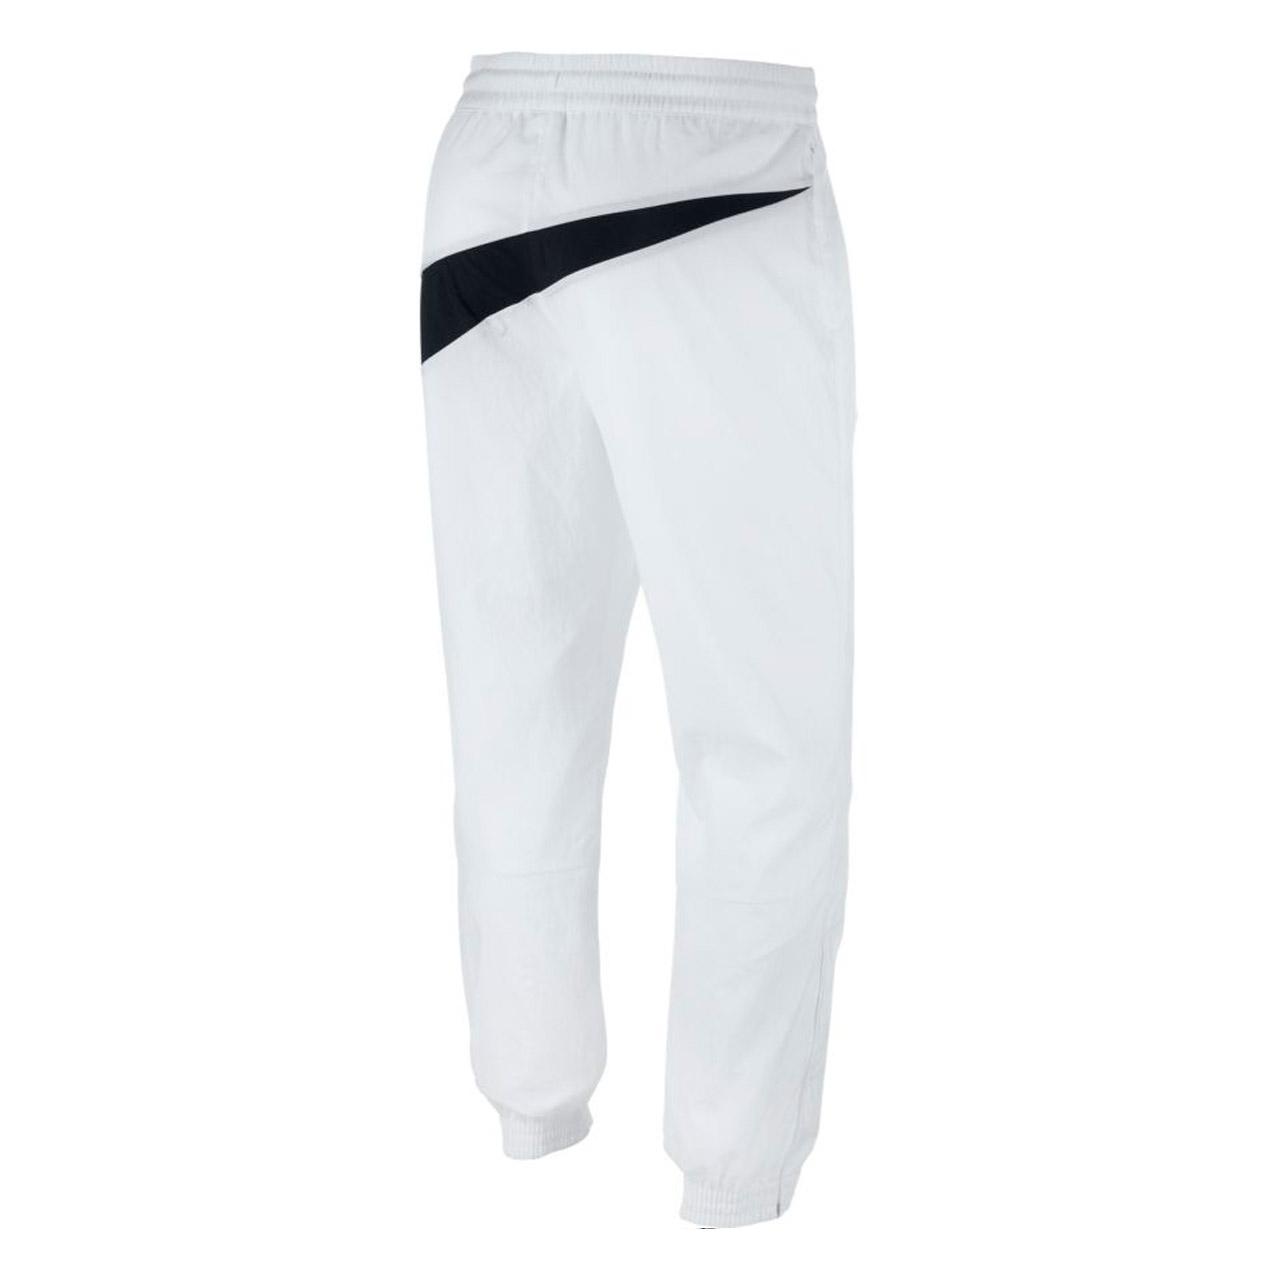 Nike Synthetic Nike Nsw Swoosh Woven Pants in White for Men - Lyst